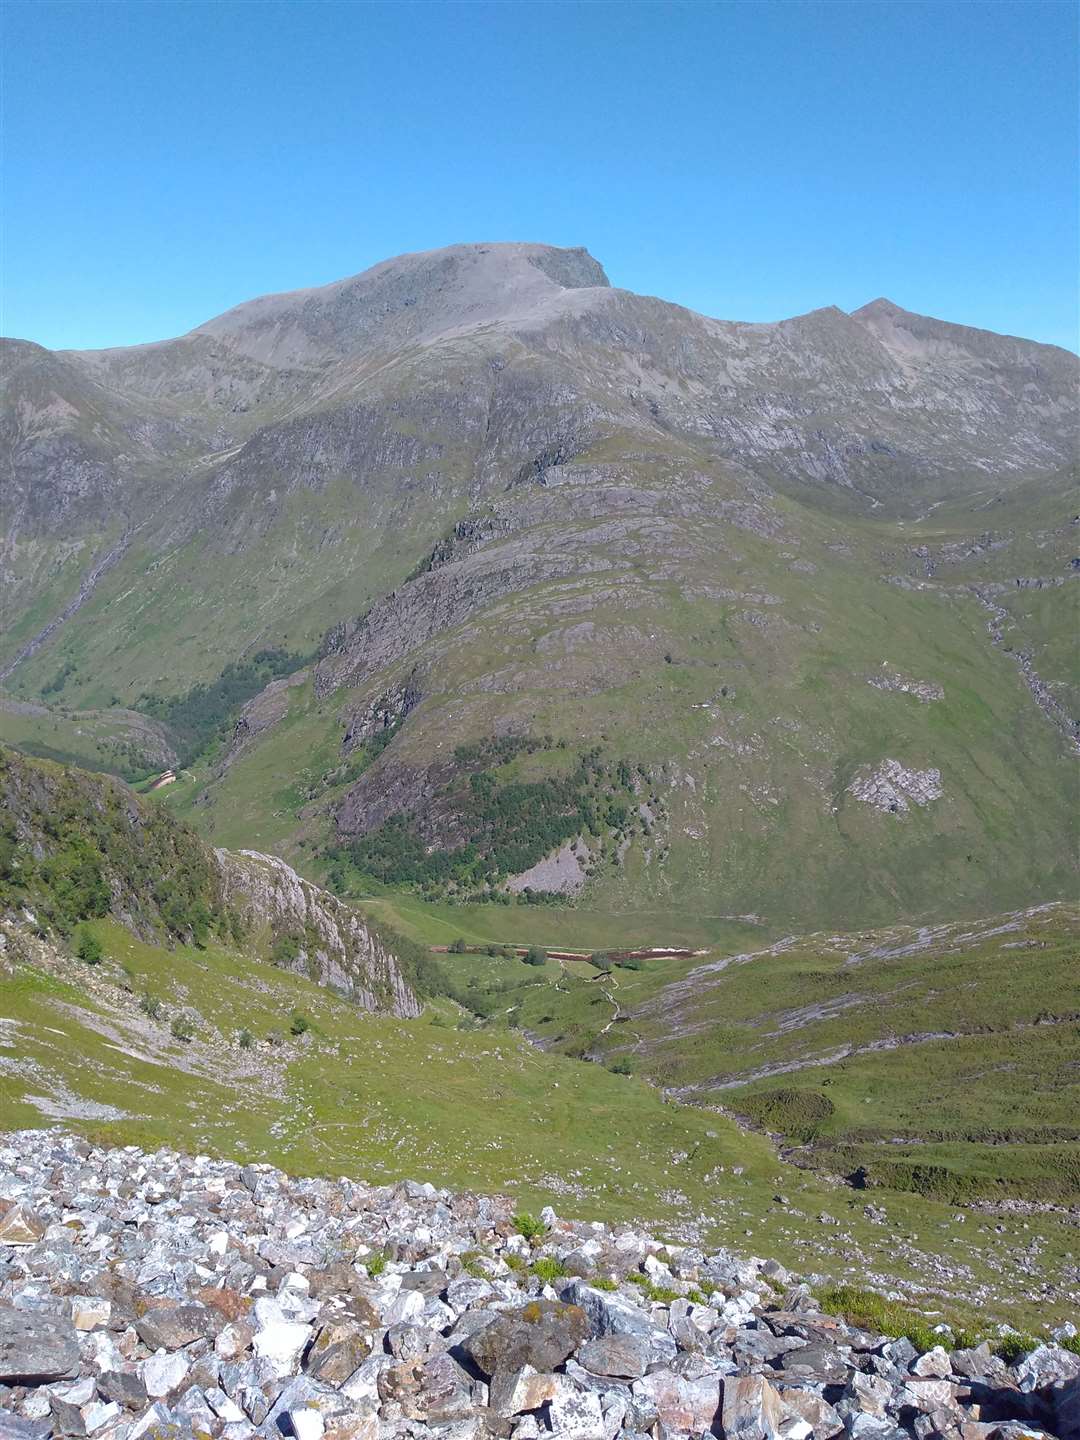 Looking back at Ben Nevis on the ascent of An Gearanach.